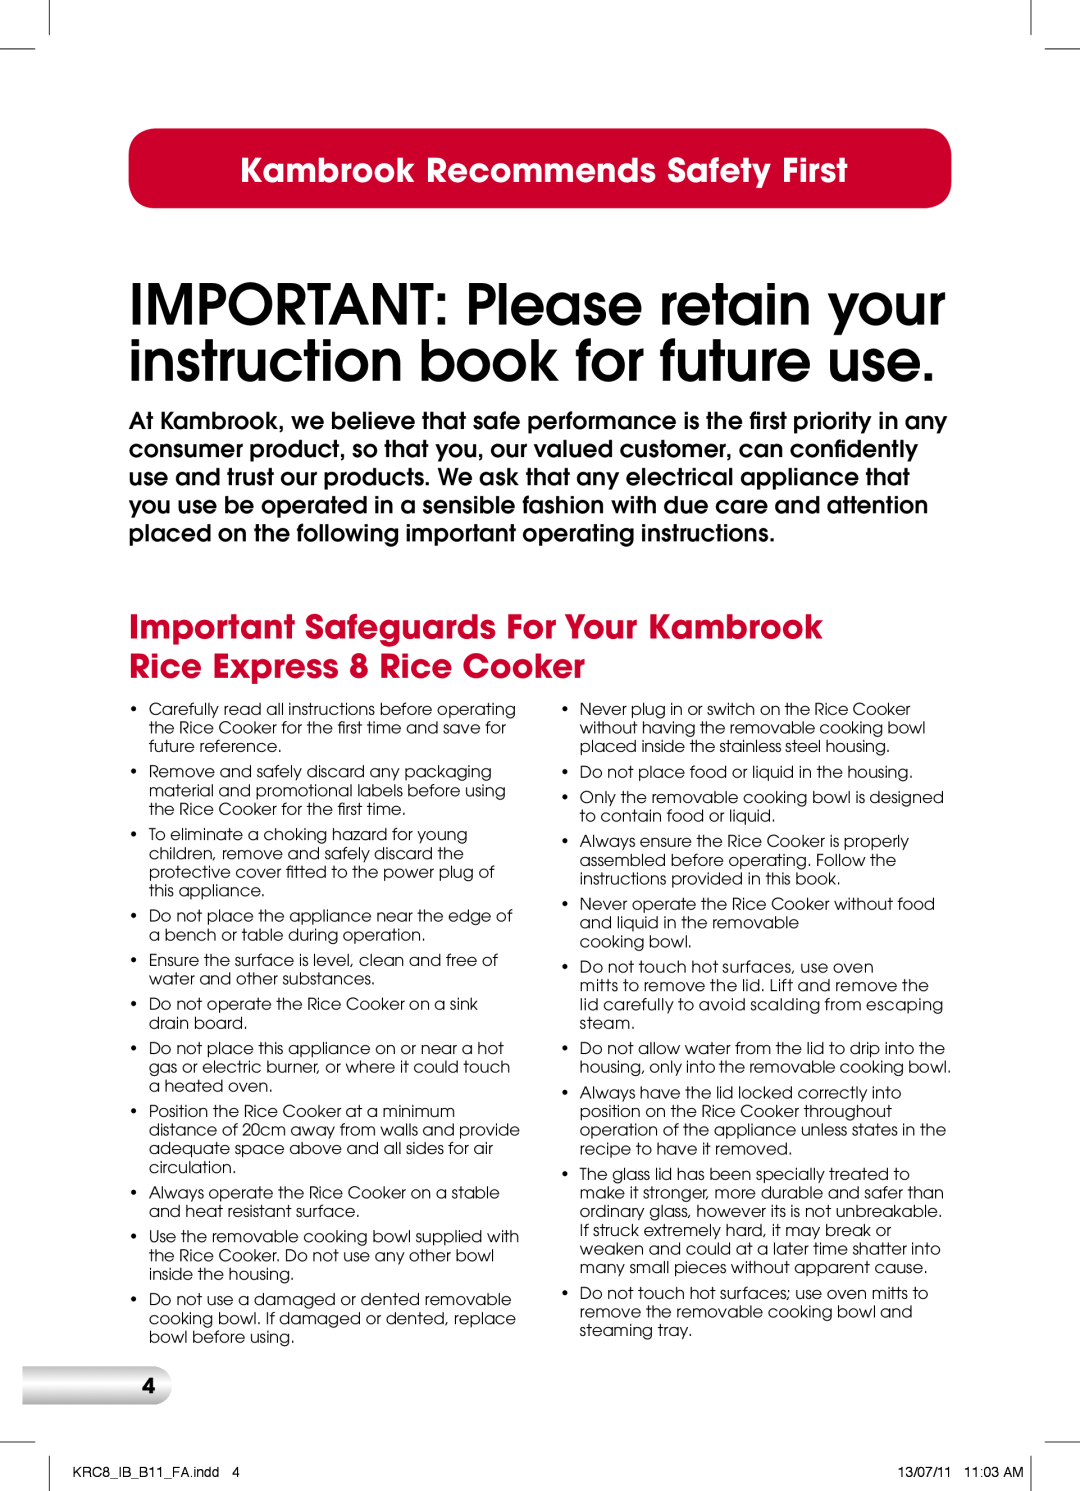 Kambrook KRC8 manual Kambrook Recommends Safety First 